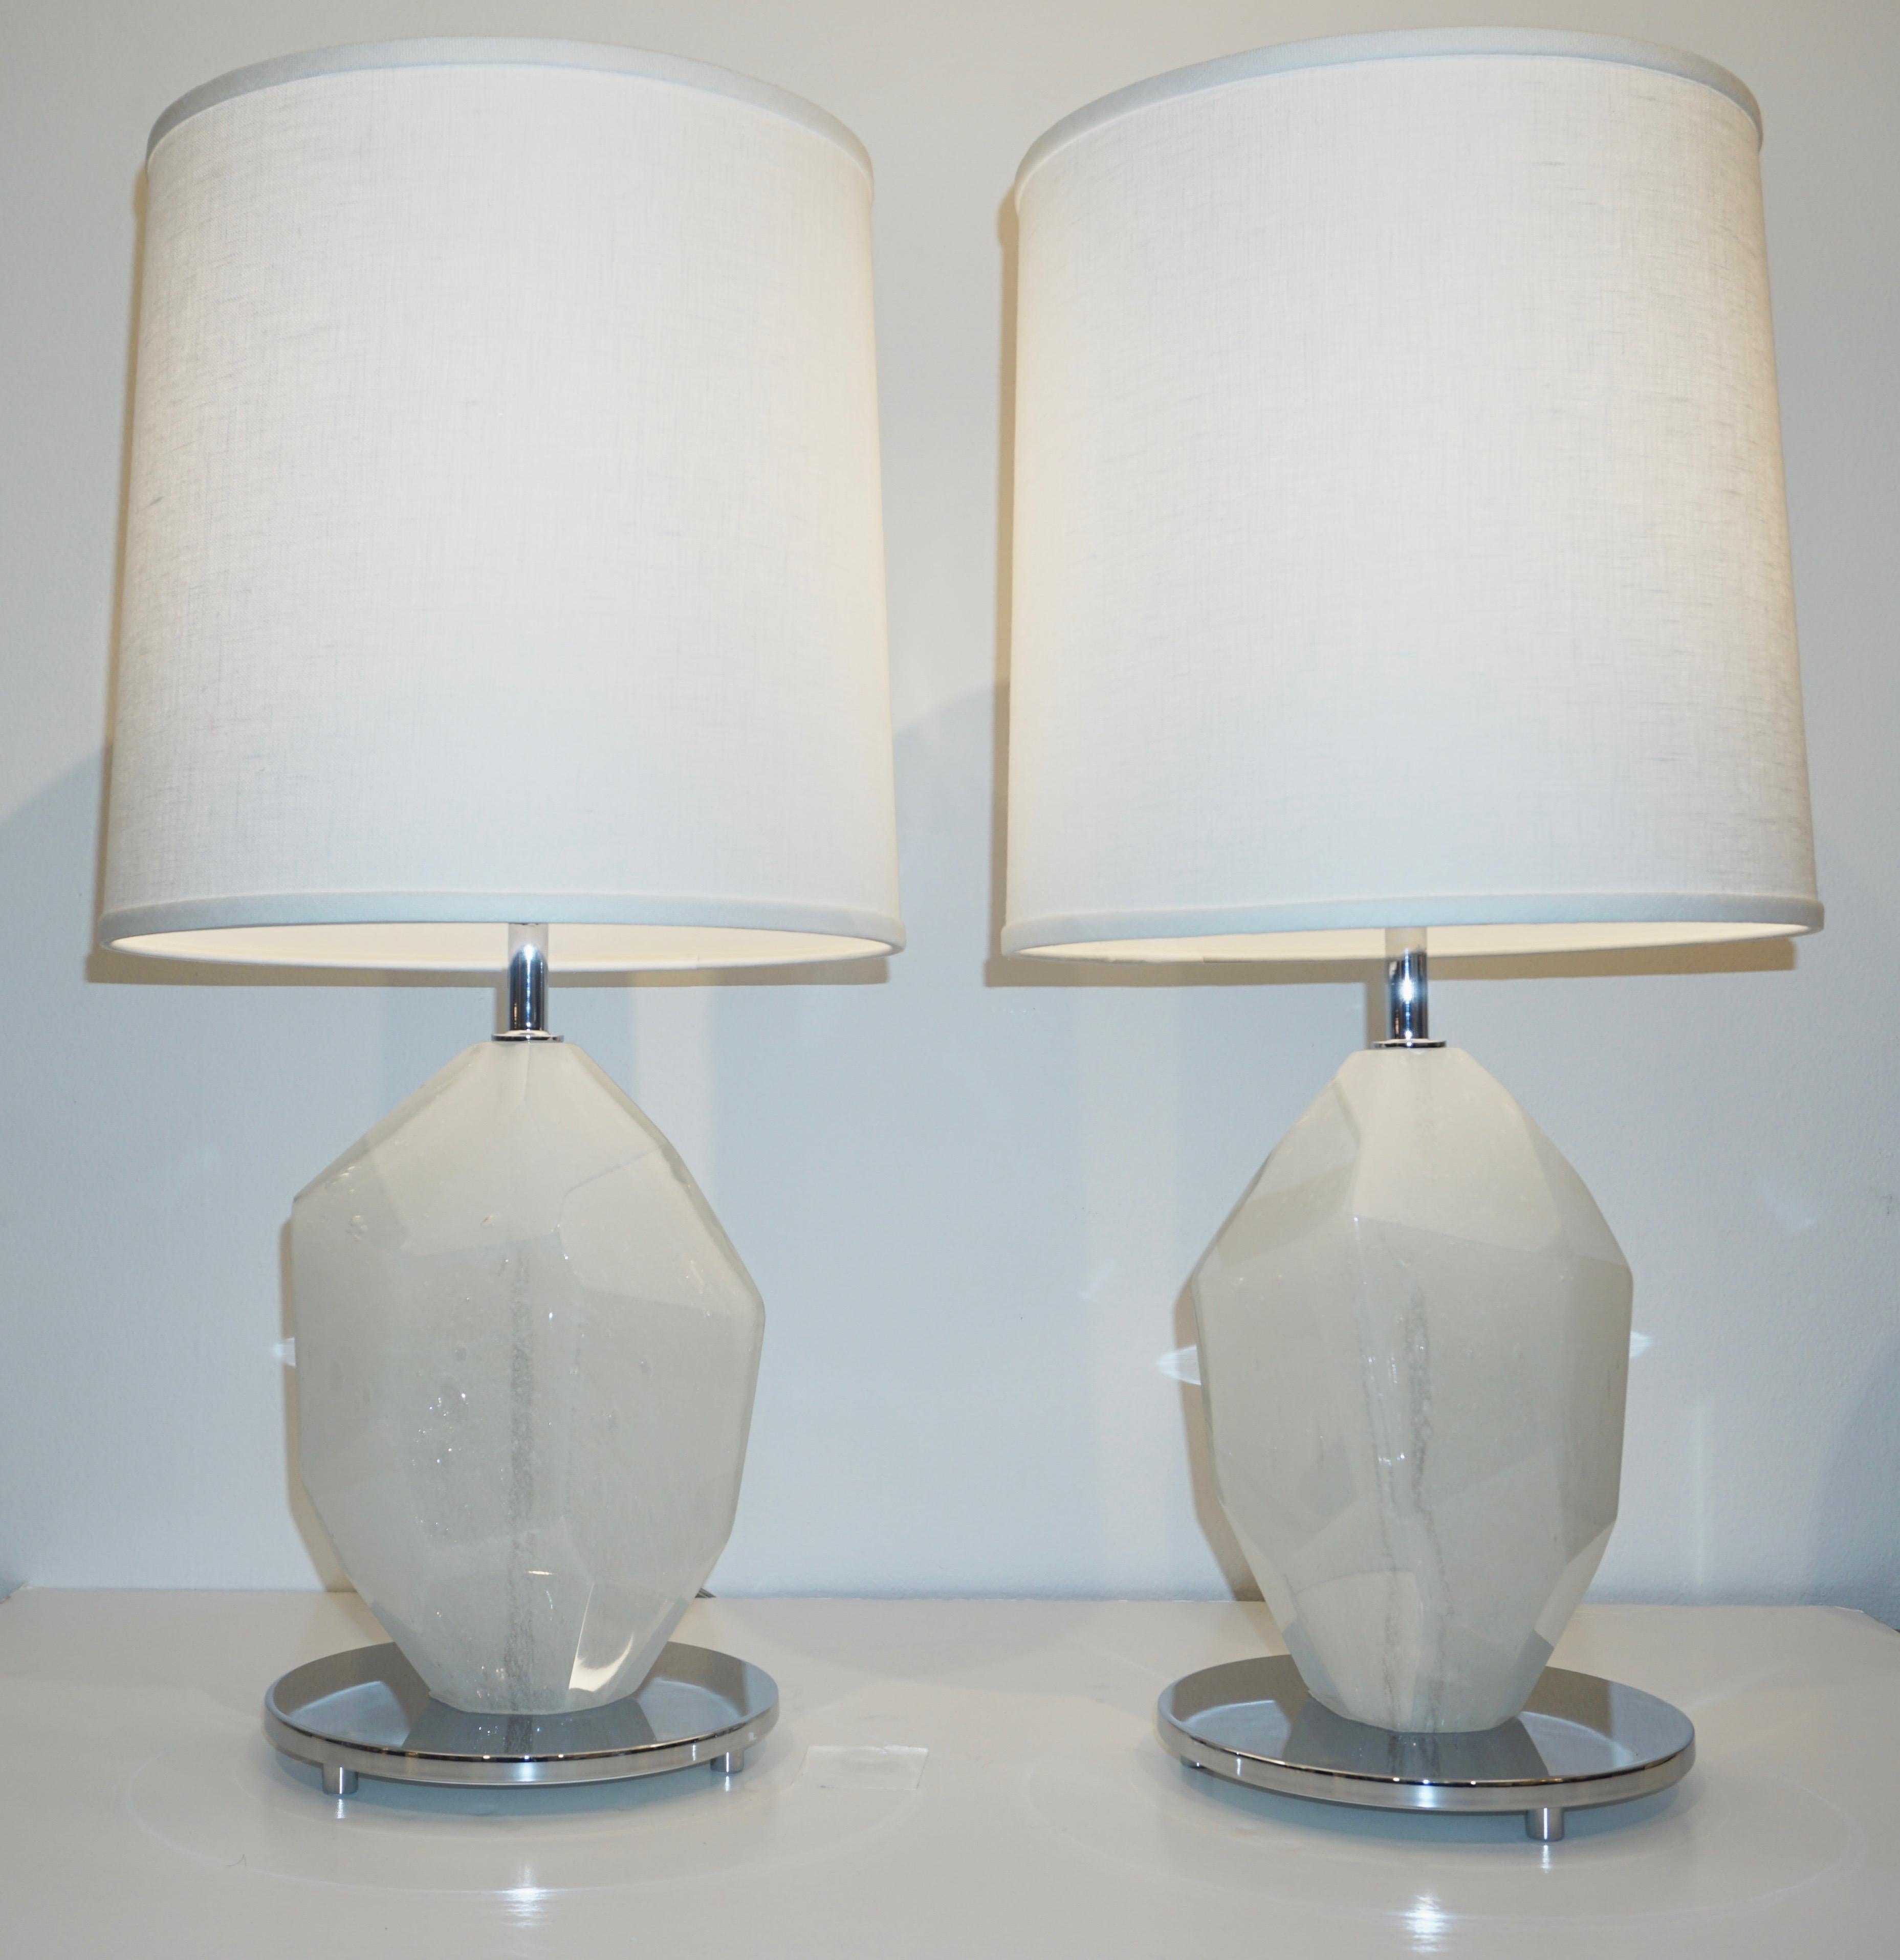 Contemporary made in Italy pair of table lamps signed by Alberto Donà Studio of organic design, high quality of execution, entirely handcrafted and hand polished, the heavy solid Murano glass bodies in the sophisticated Pulegoso technique, lots of